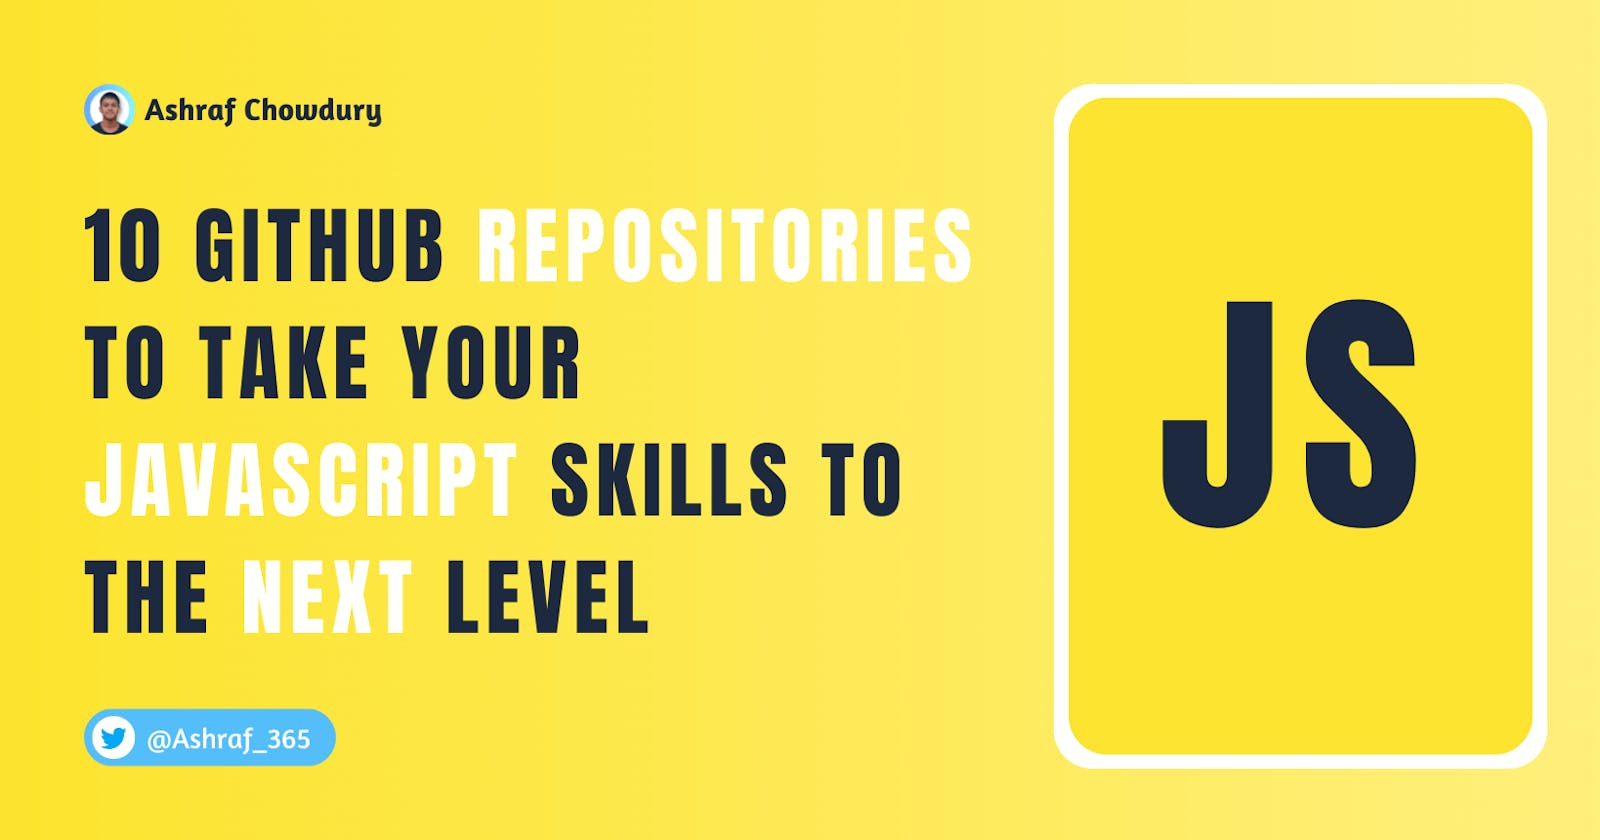 10 GitHub repositories that will take your Javascript knowledge next level